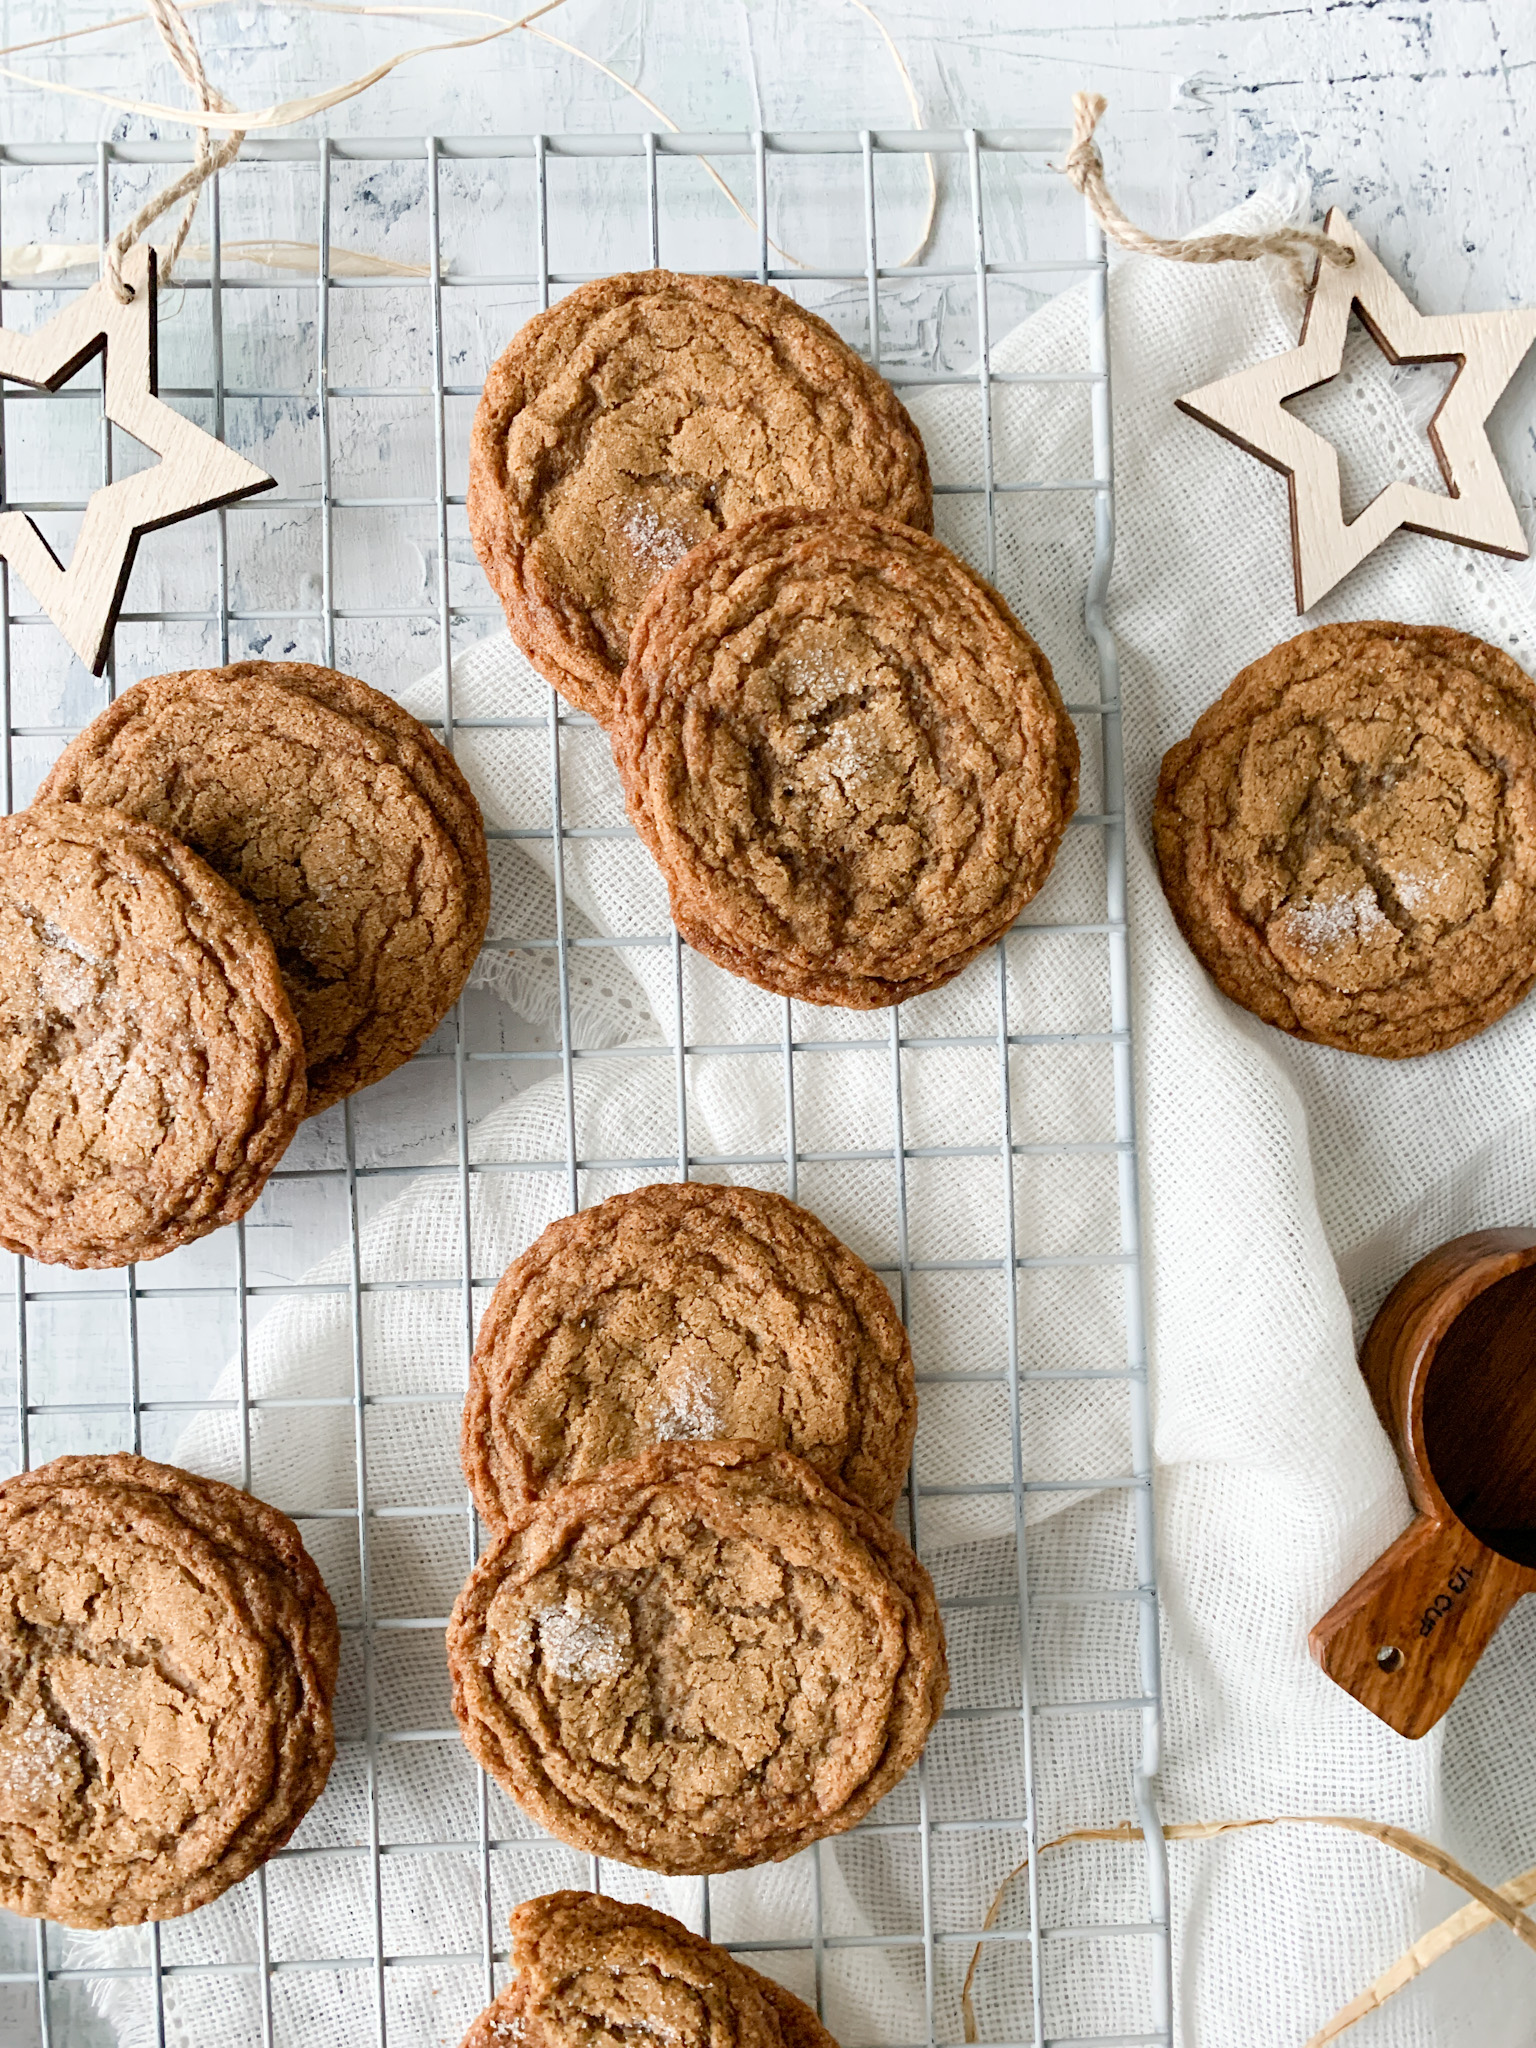 These gluten-free soft gingersnaps are soft and chewy and a classic Christmas cookie.